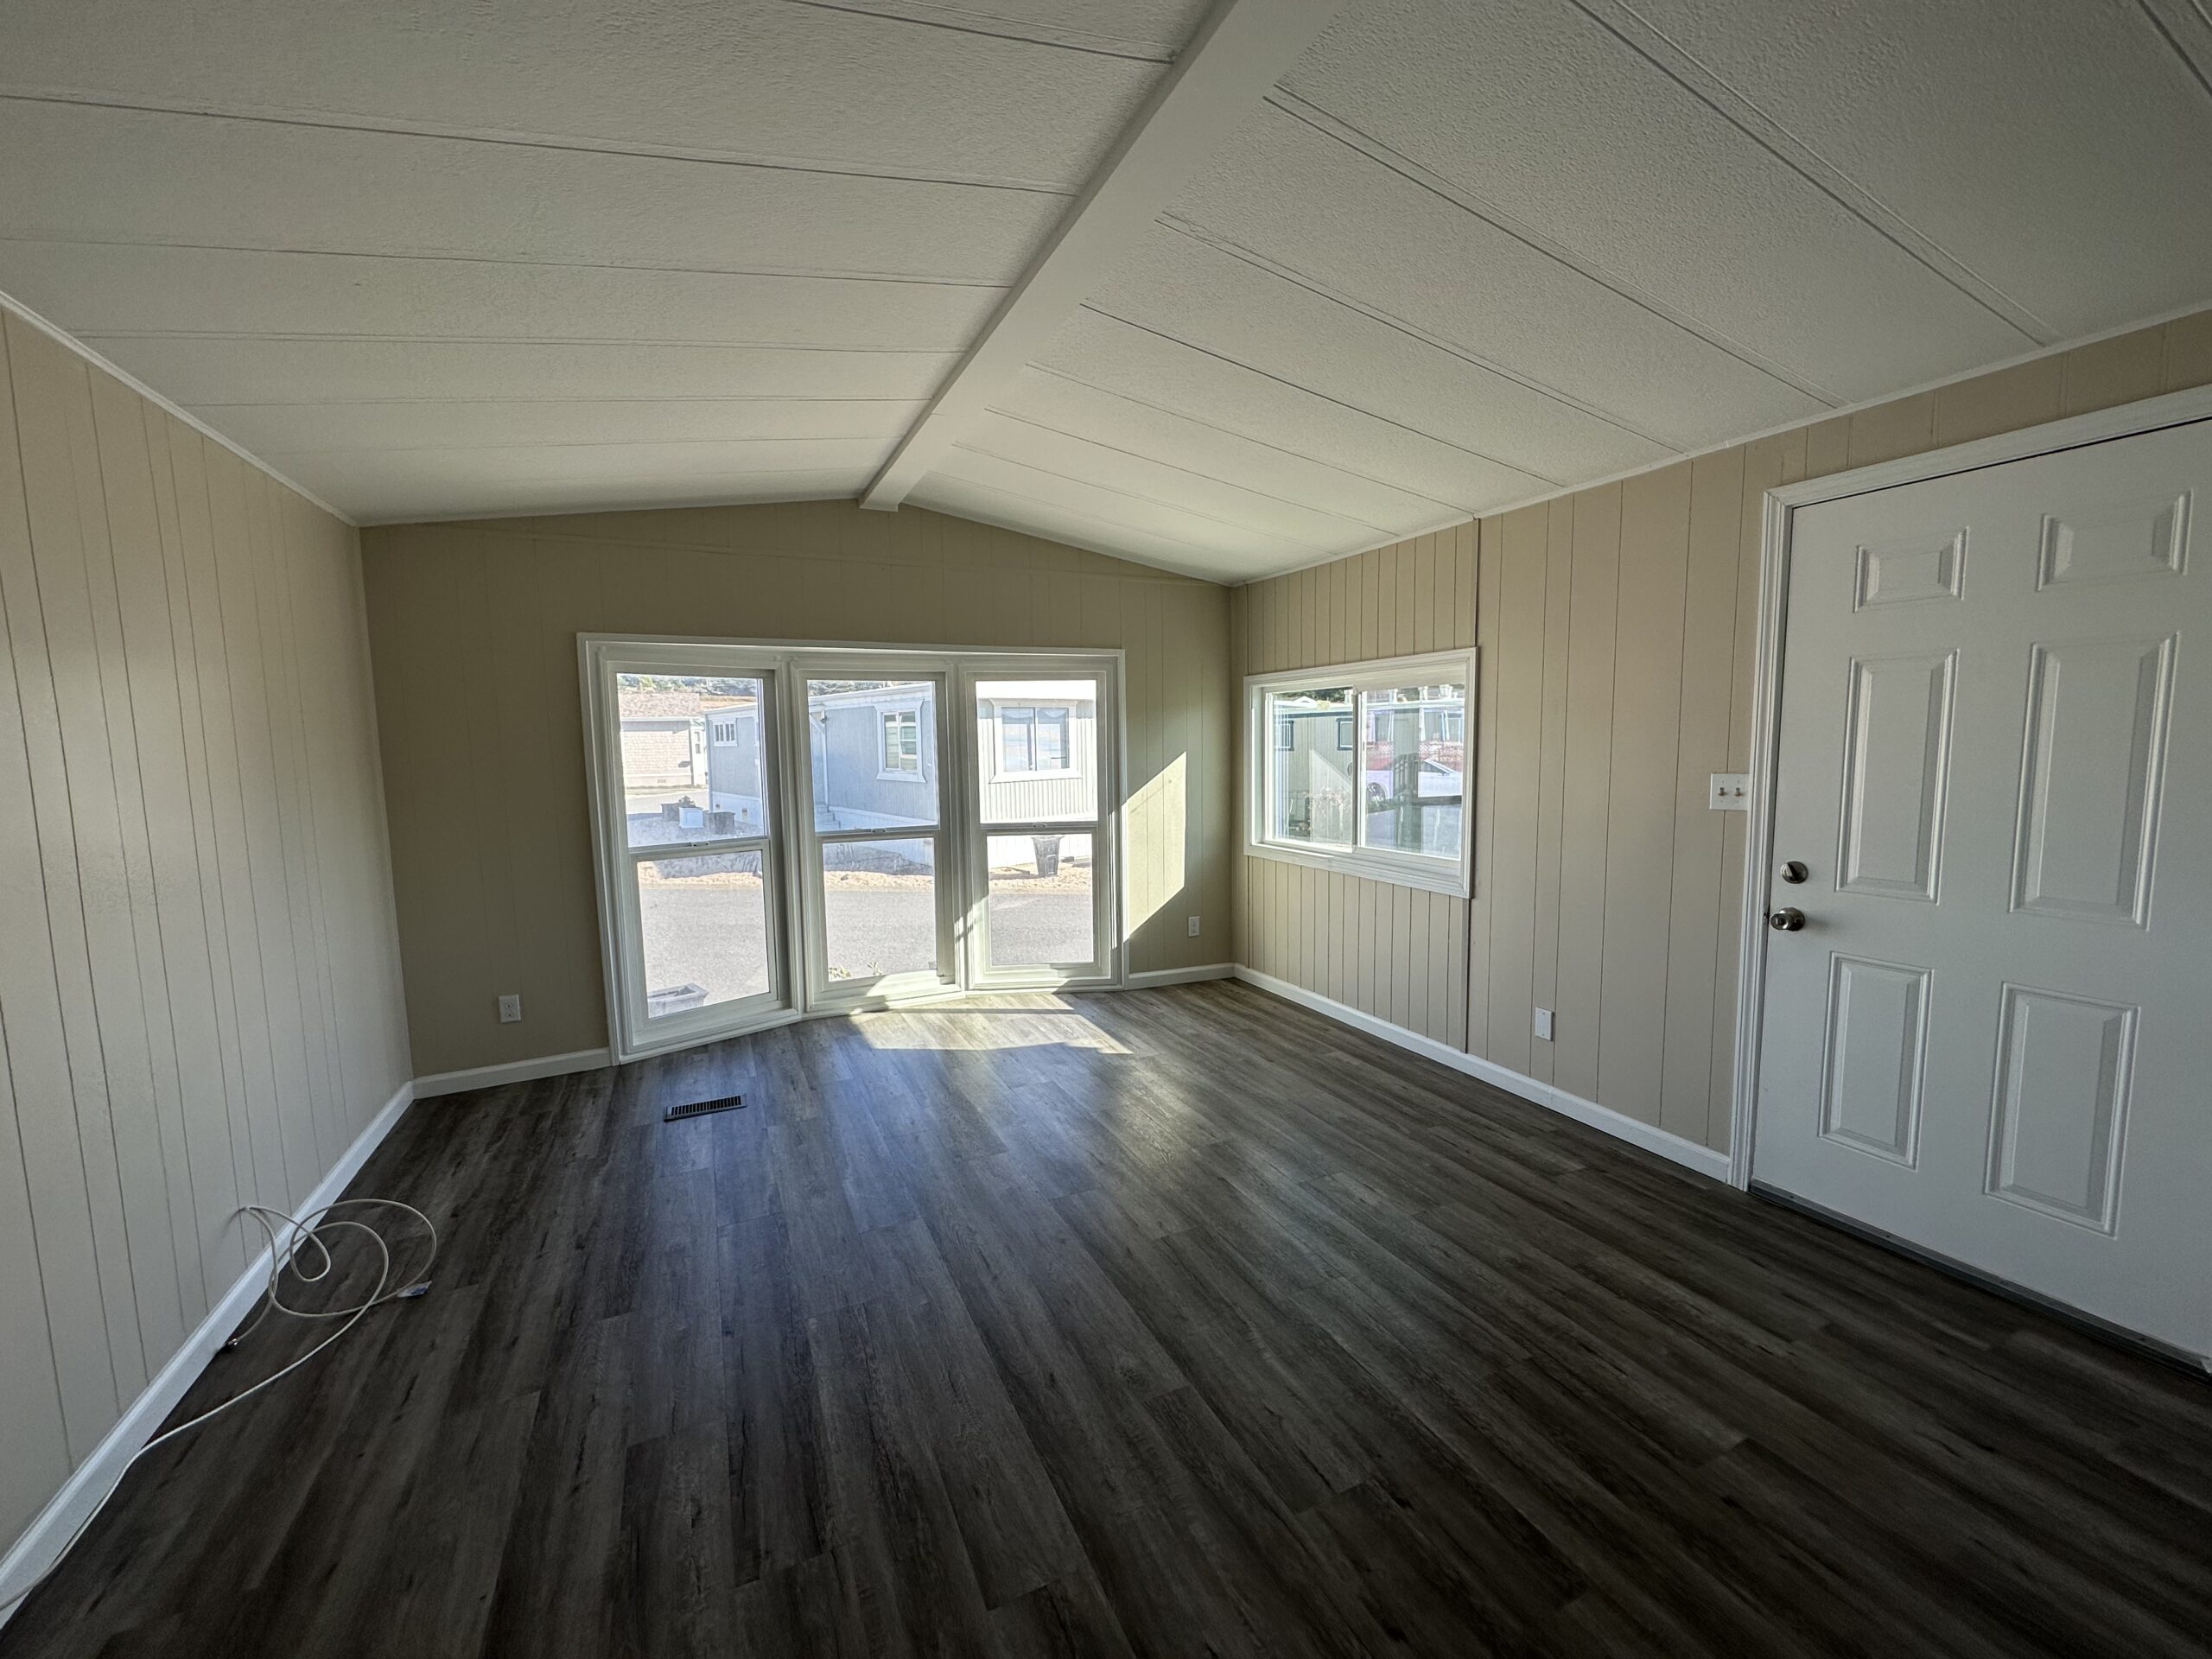 Spacious room with natural light, featuring beige walls, dark flooring, and a white door.